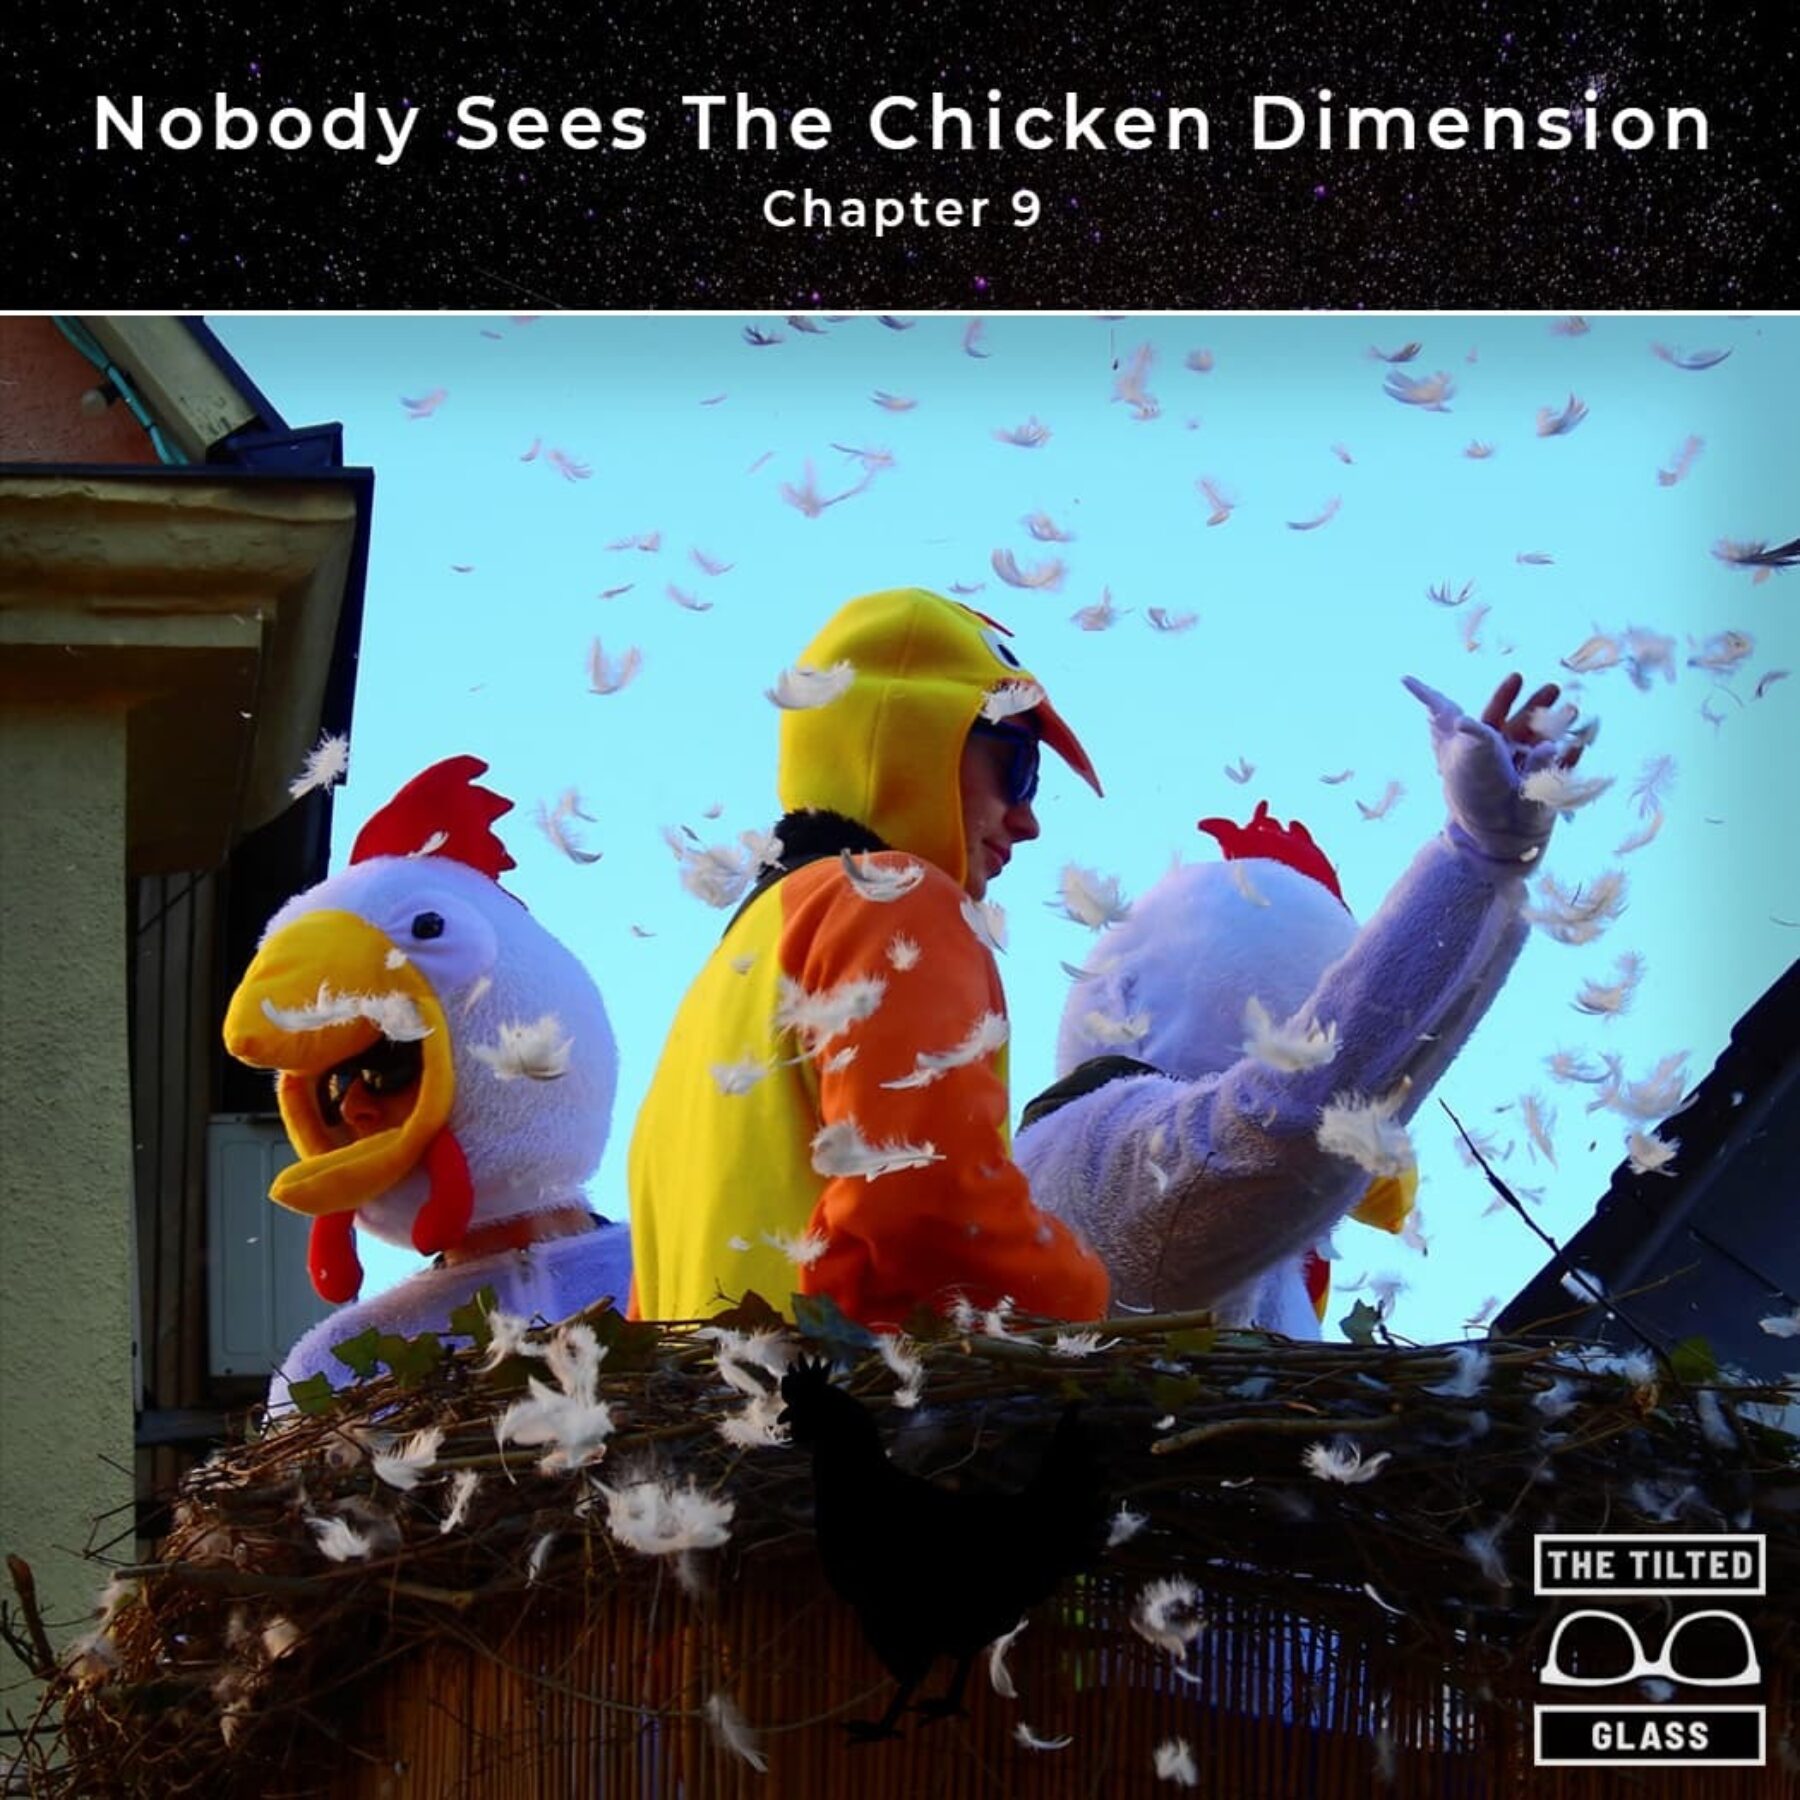 Nobody Sees The Chicken Dimension - Chapter 9 - Costume Parade